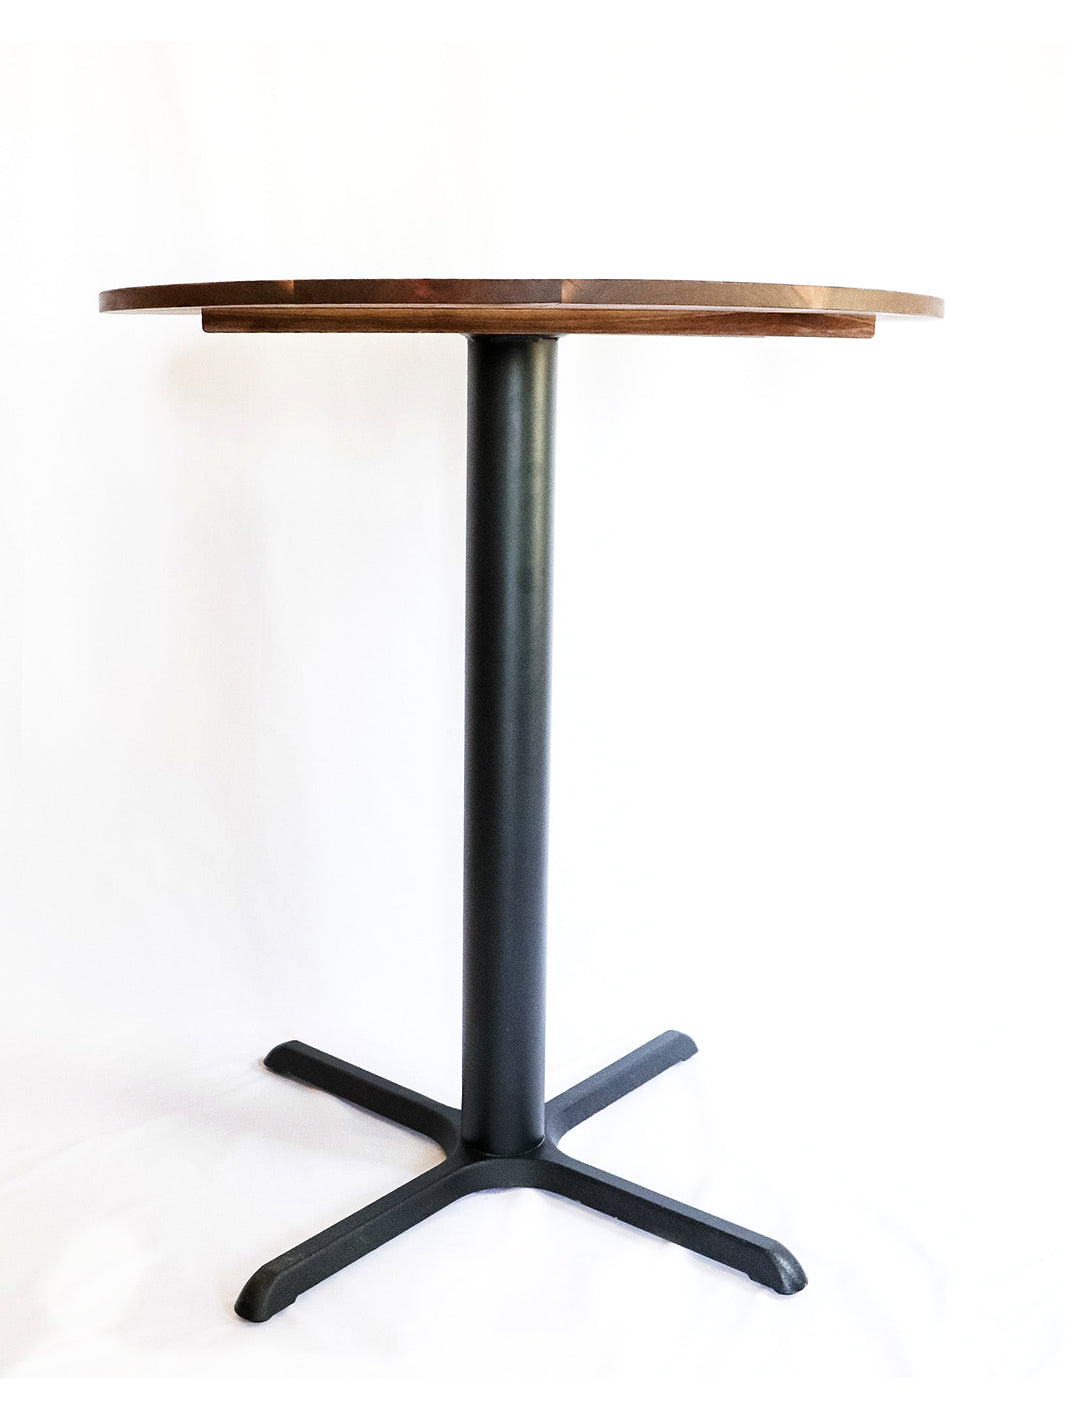 Modern Round Walnut Pub Table with Black Steel Legs | Bar or Standard Height Earthly Comfort Dining Tables 804-1